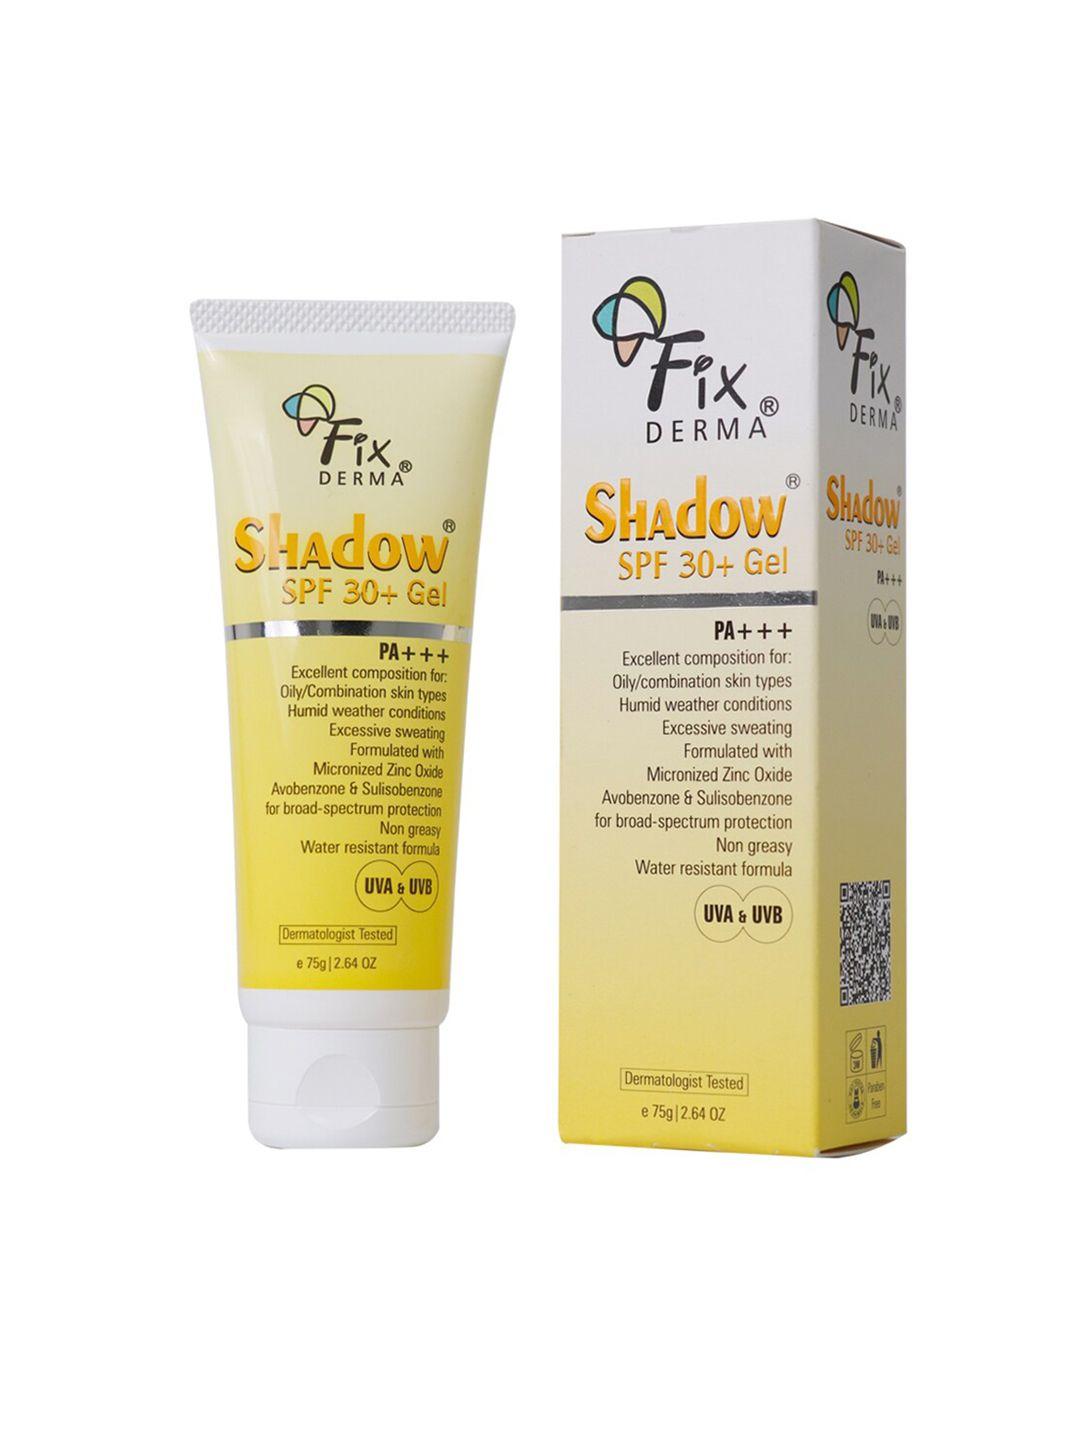 fixderma shadow sunscreen spf 30+ gel for oily skin with pa+++ protection - 75g